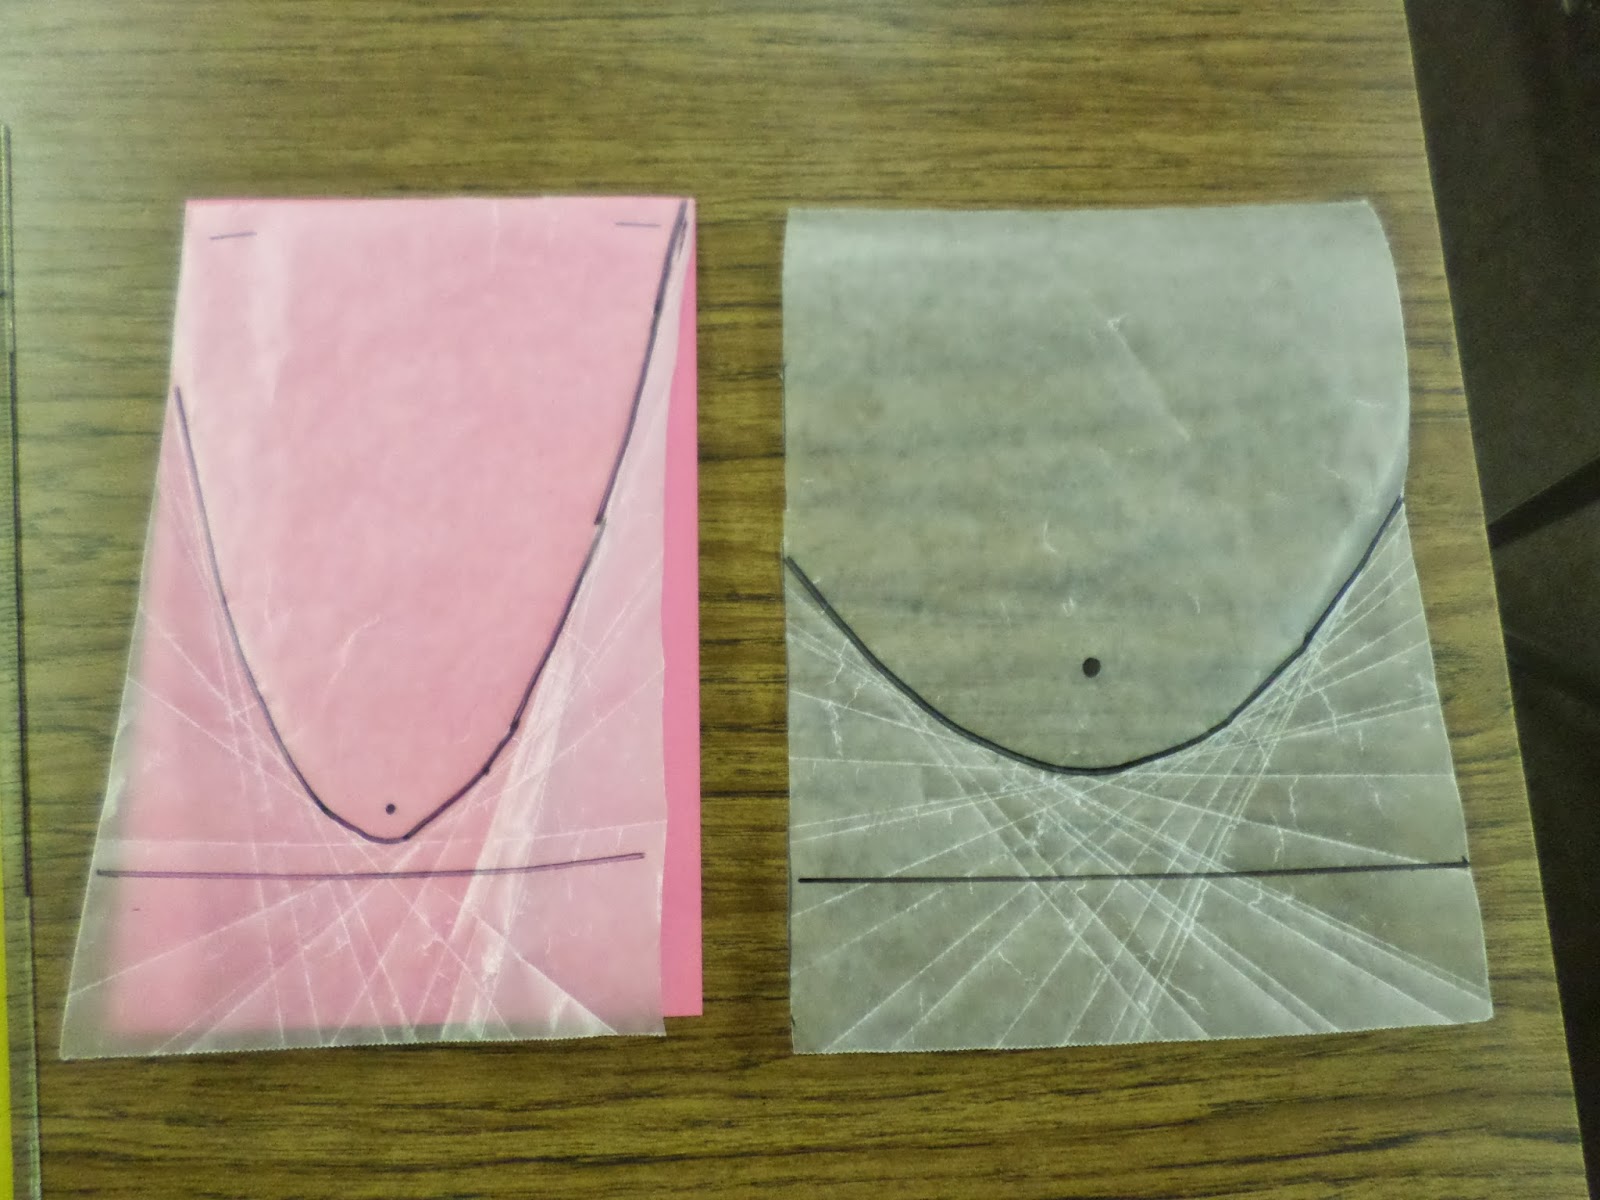 Illustration of Different Placement of Focus for wax Paper Parabola Activity. 